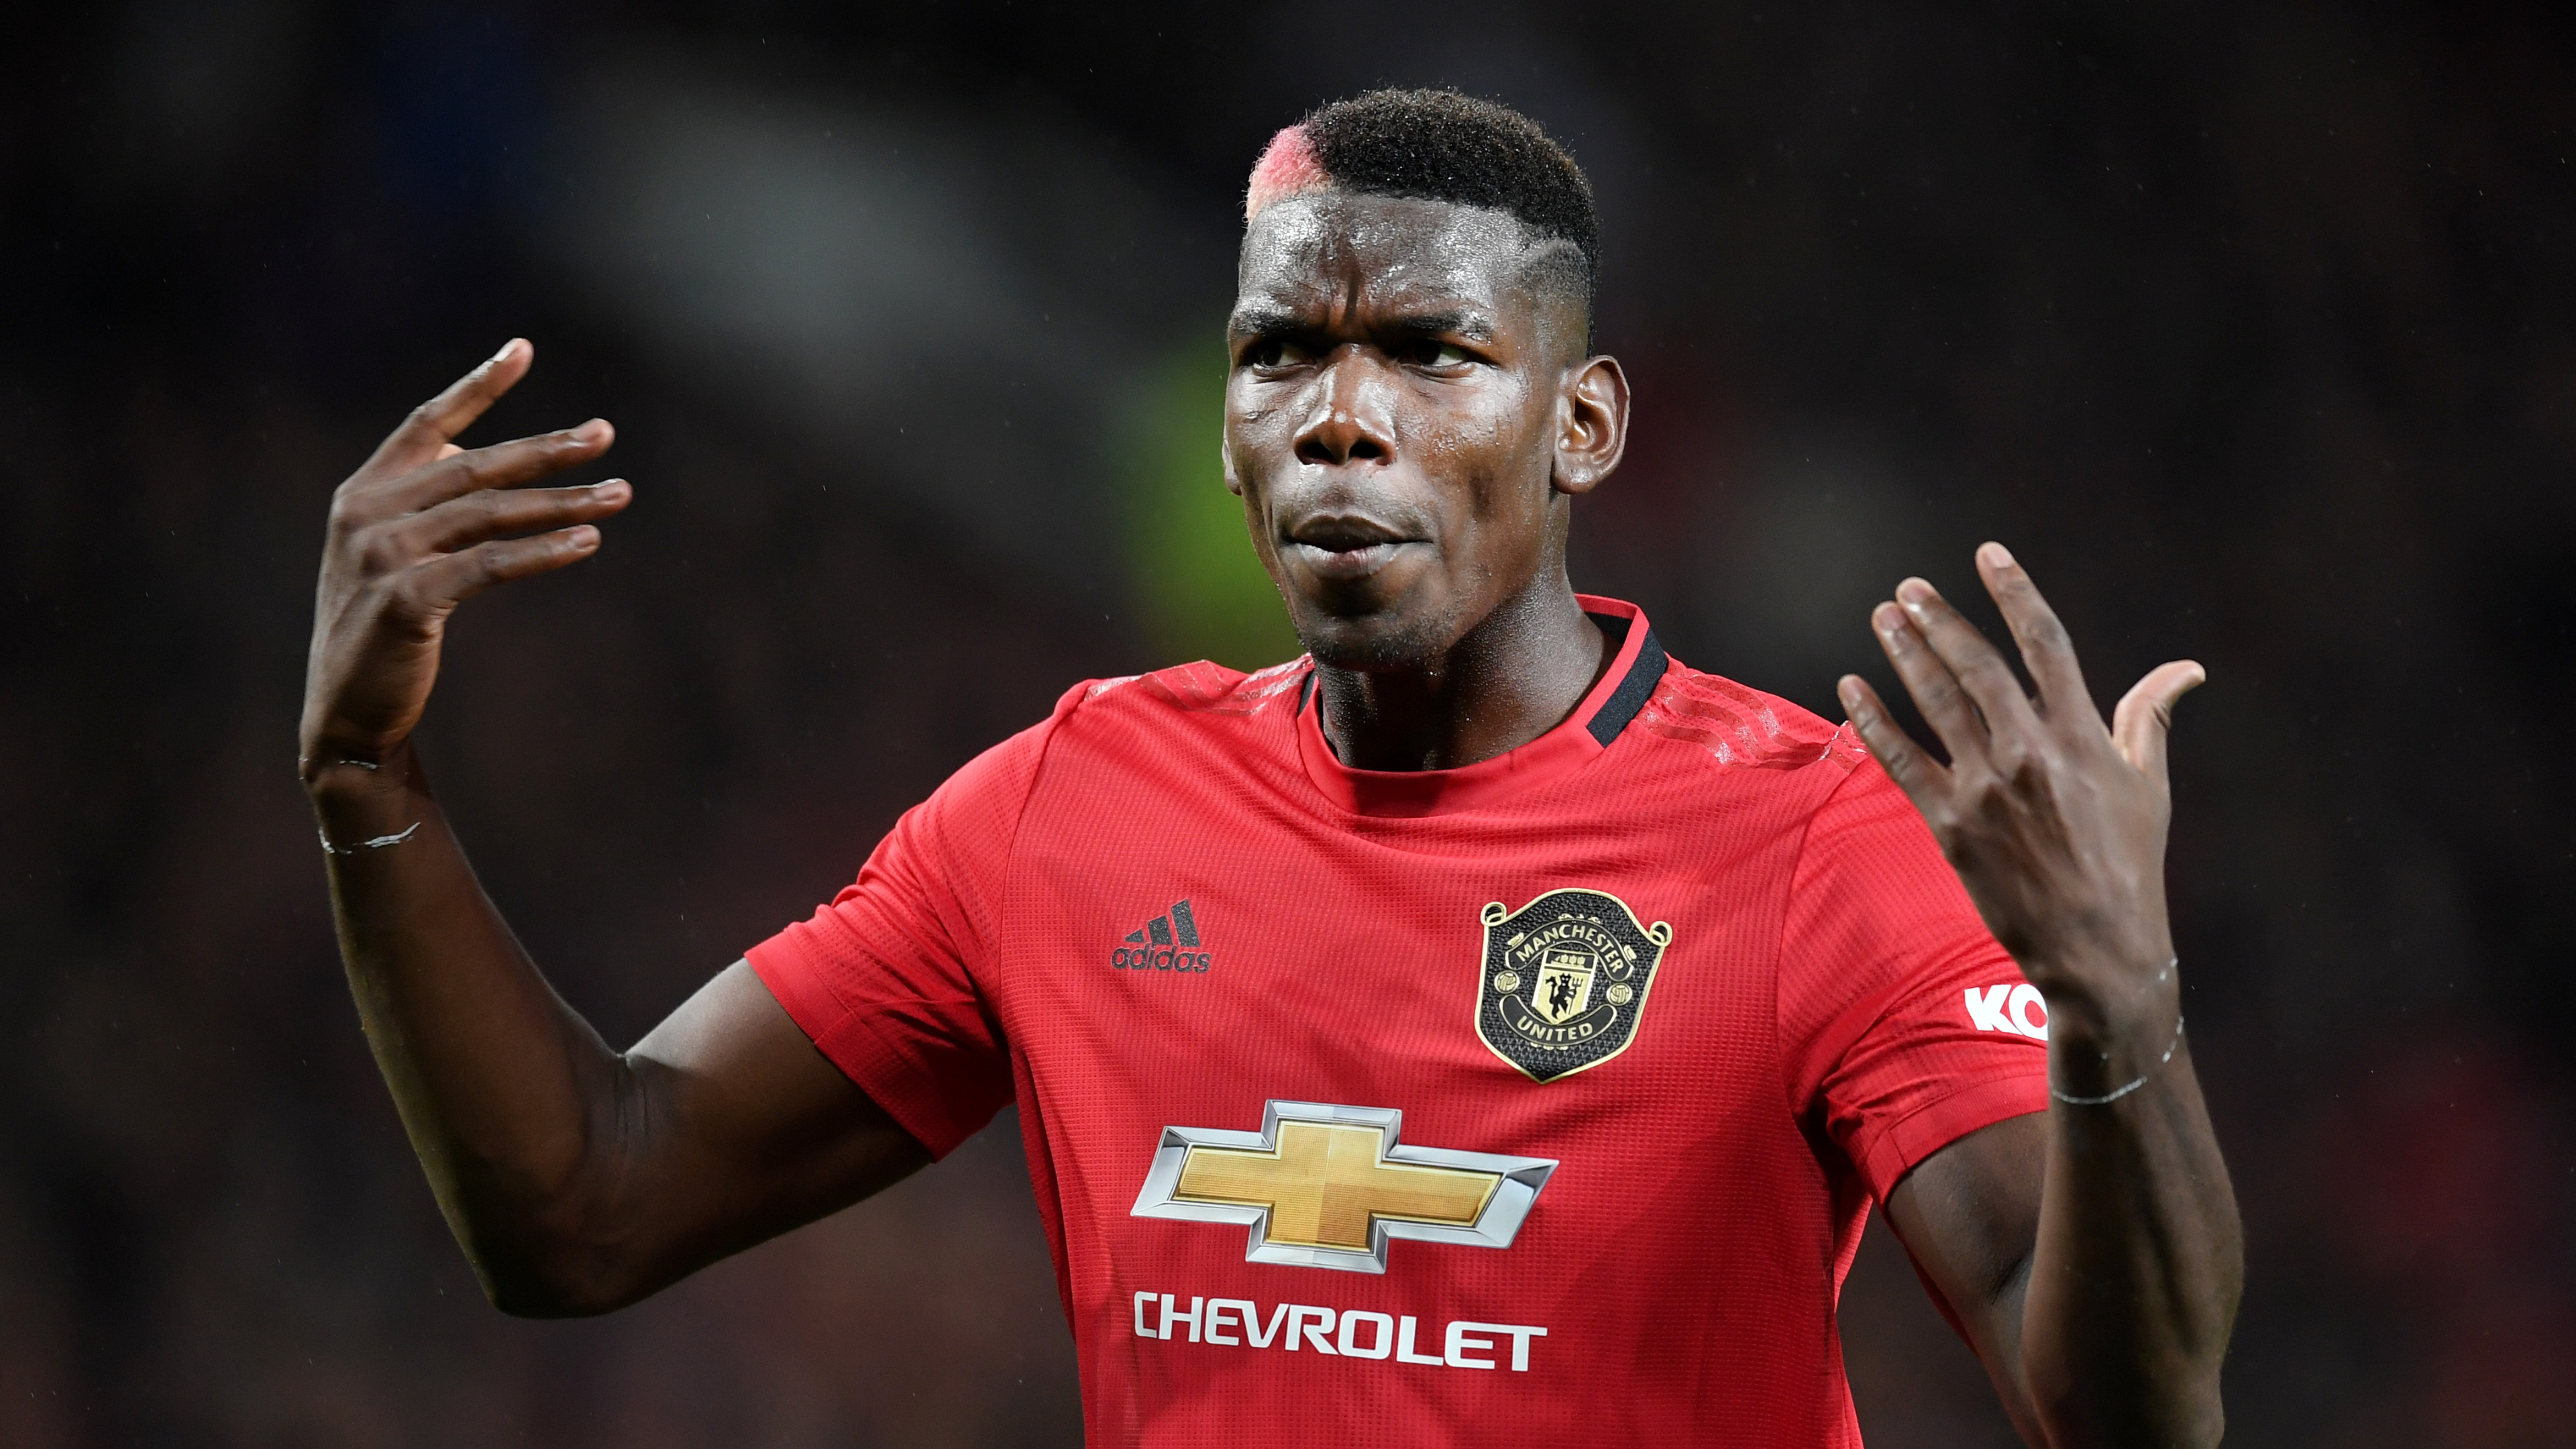 ‘Pogba can unlock the door for Man Utd’ – Frenchman’s return will see Red Devils take ‘next step’, says Giggs